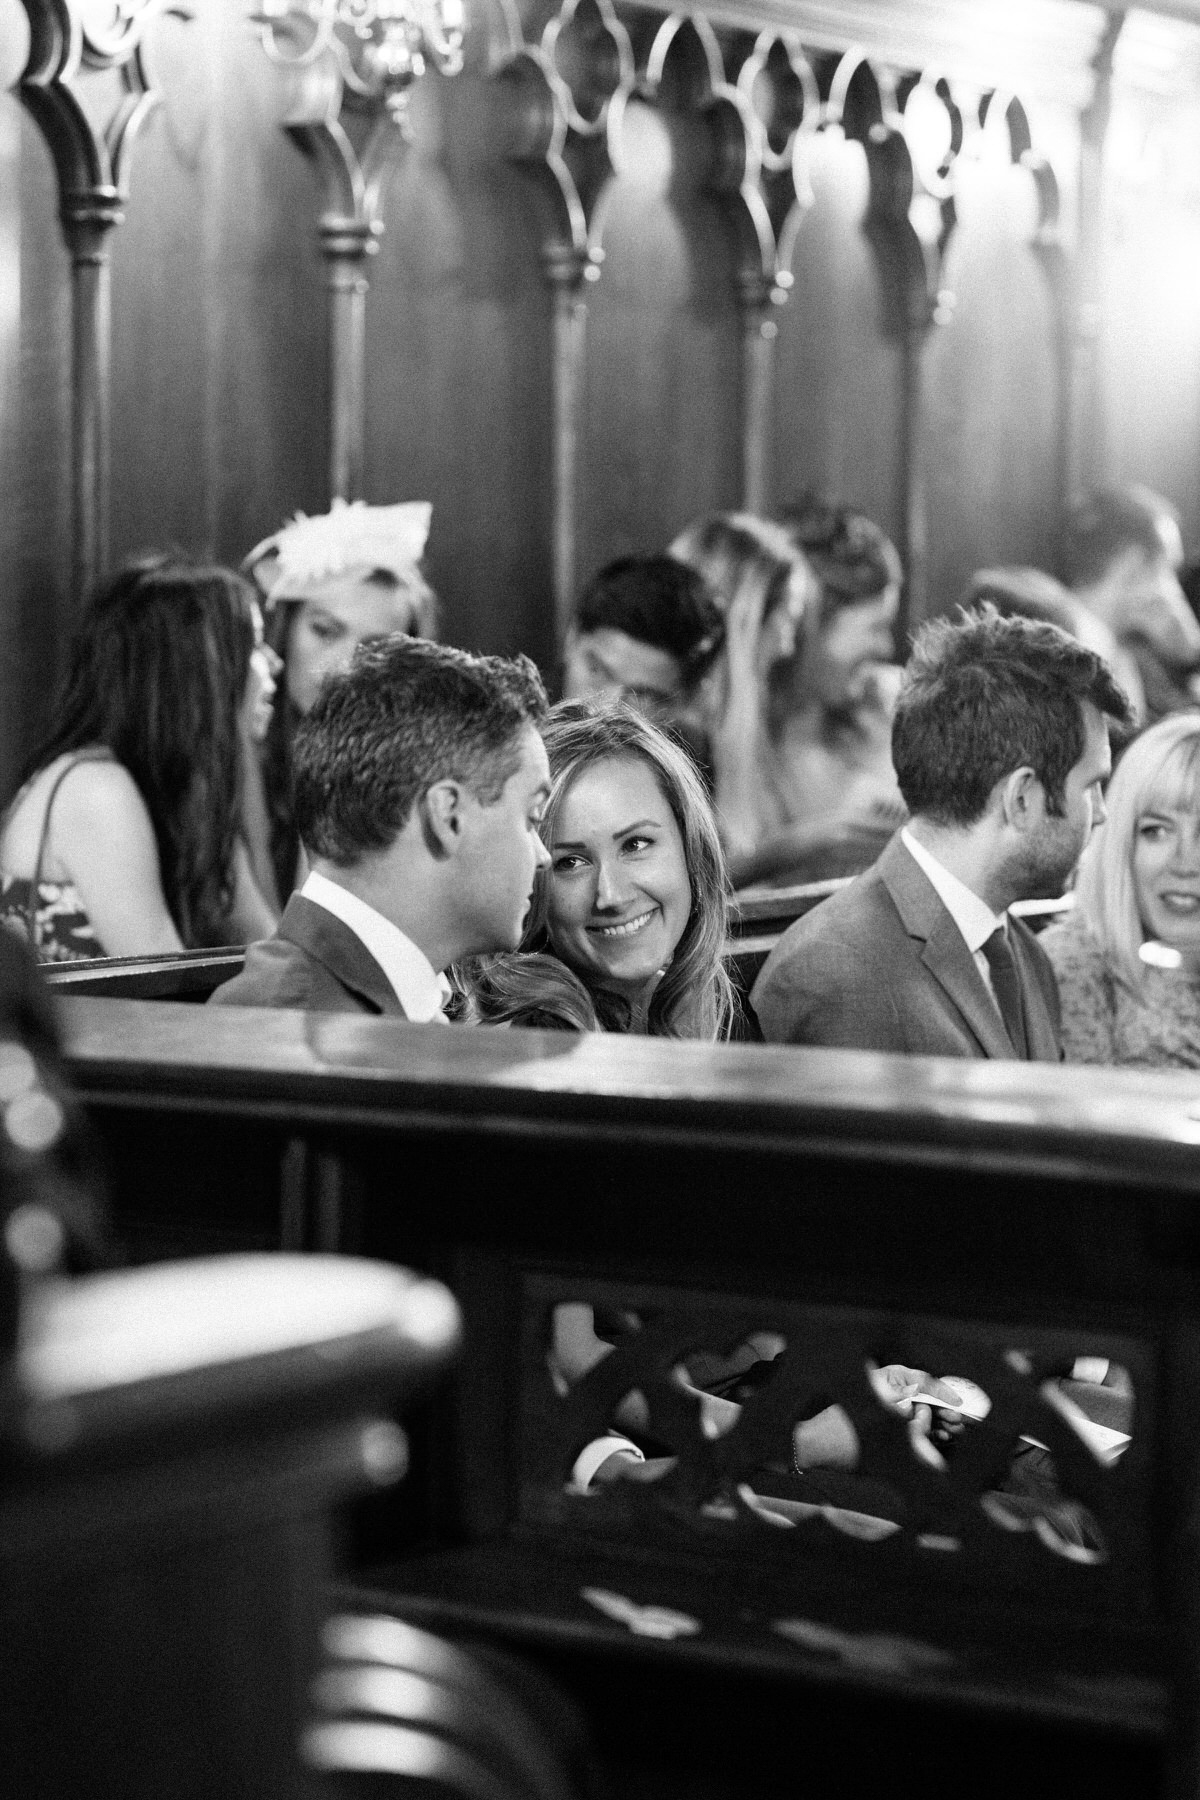 guests smiling in church wedding